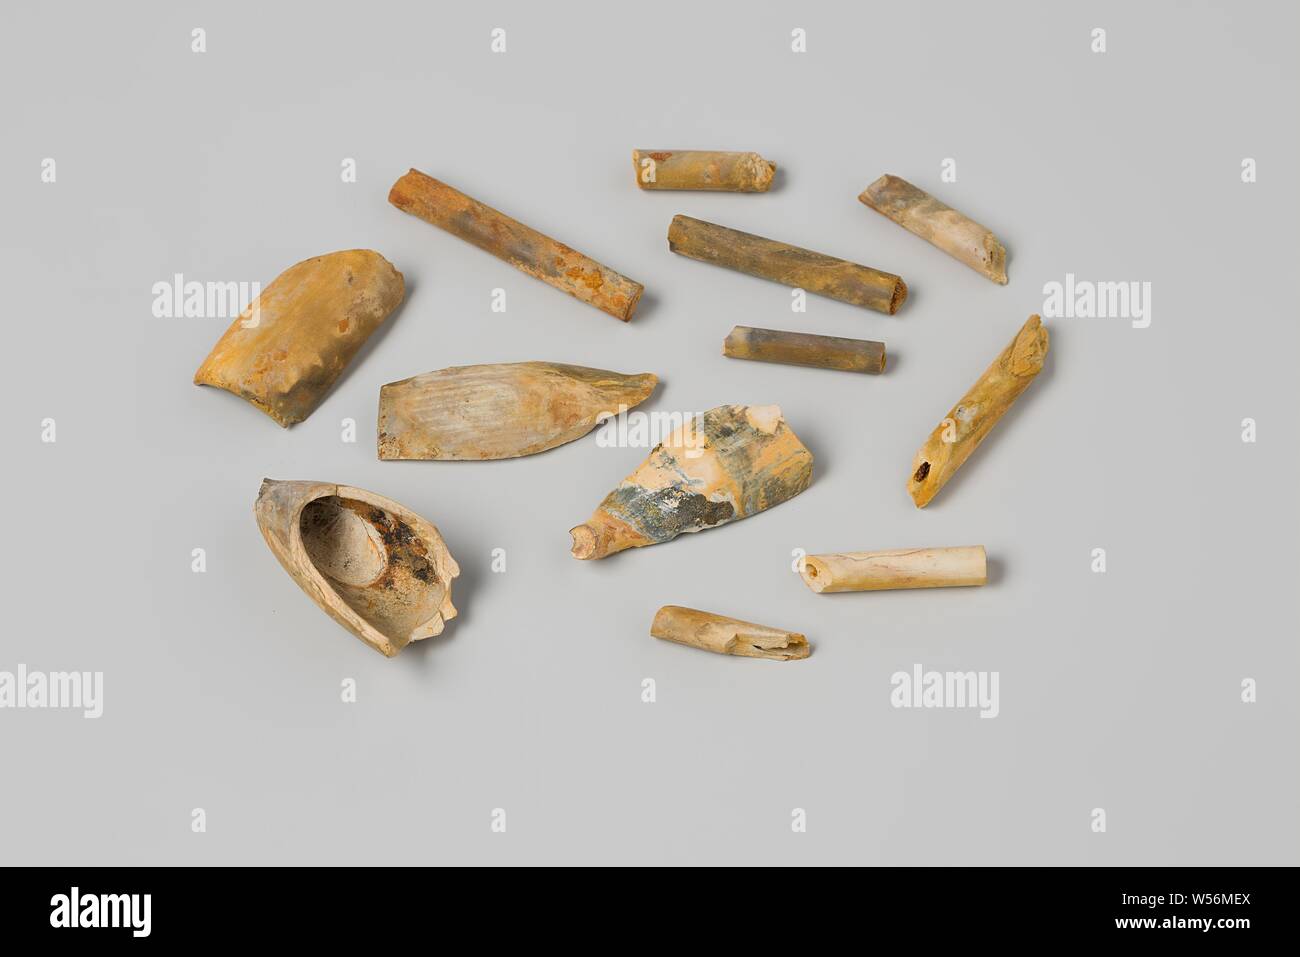 Pipe heads and stems from the wreck of the East Indies' t Vliegend Hart, Four fragments of heads of earthen Gouda pipes and eight pieces of pipe stem, yellow-blue-metallic discolored, Dutch East India Company Flying Heart (ship), Gouda, 1700 - 3-Feb-1735, pipe clay, l 3.8 cm × w 1.9 cm × d 2.1 cm × l 2.2 cm × d 0.6 cm Stock Photo